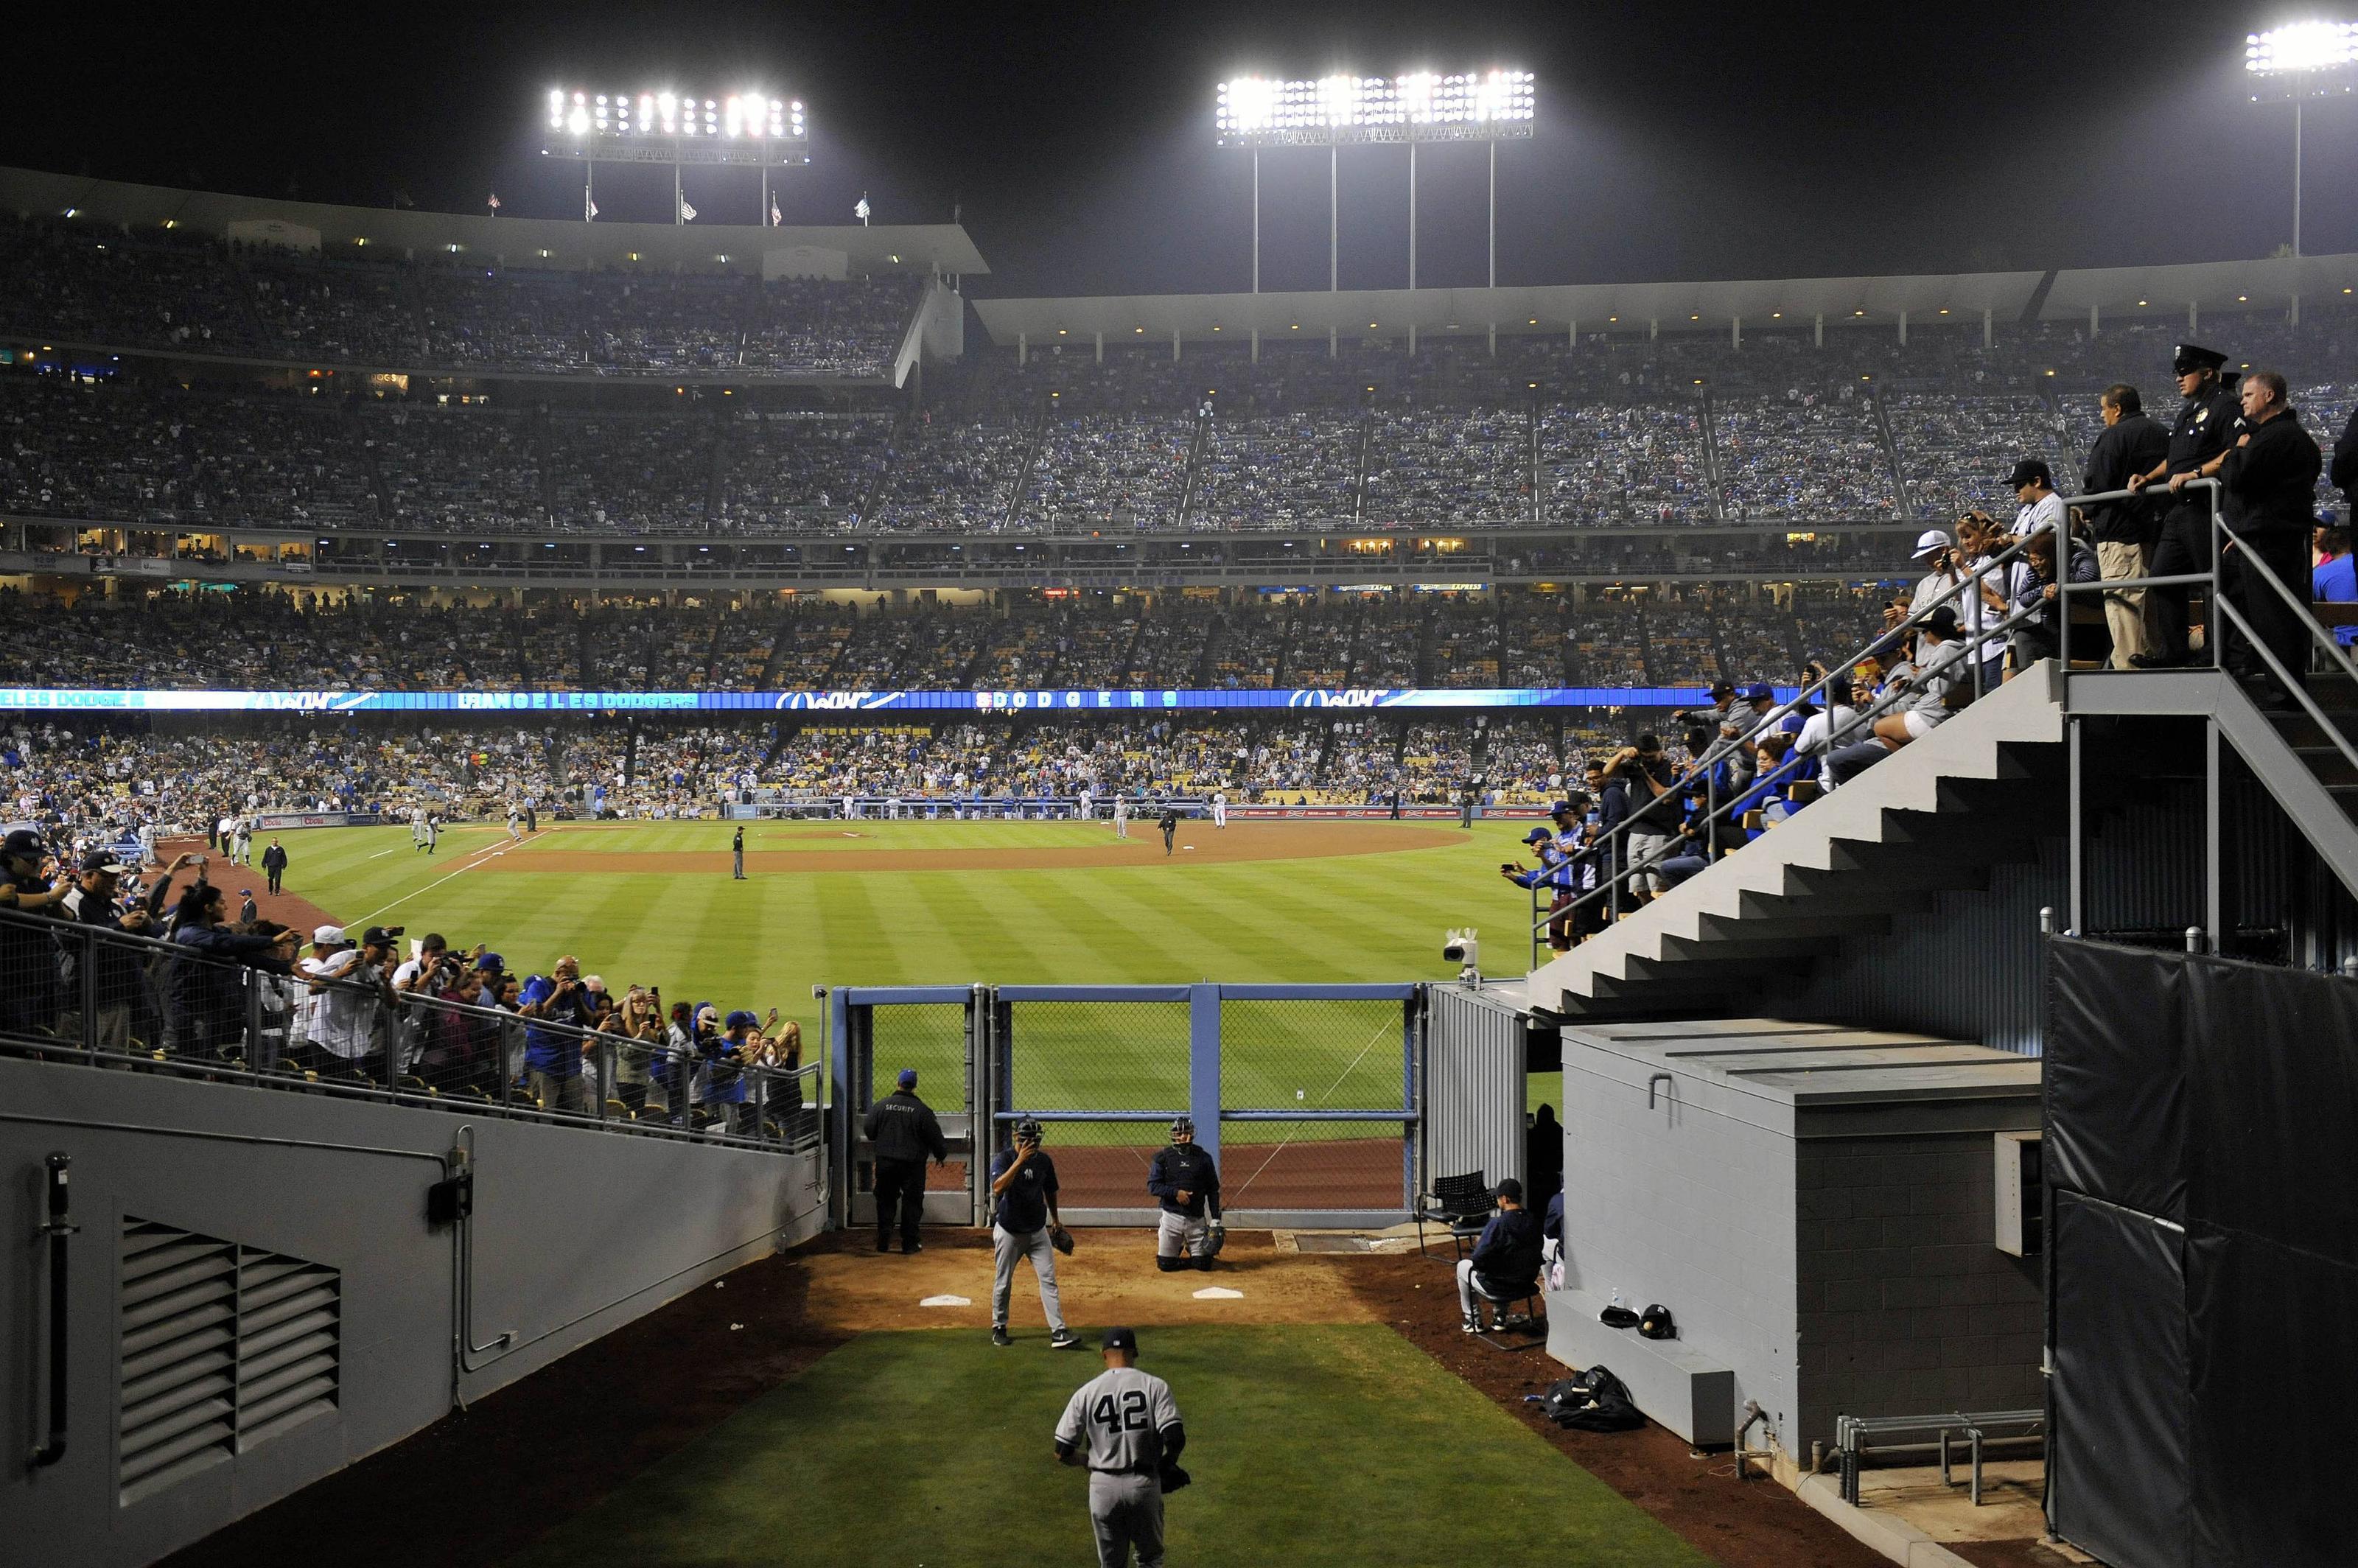 Took Me A While, But I Edited The Mariano Dodger Stadium Pic So